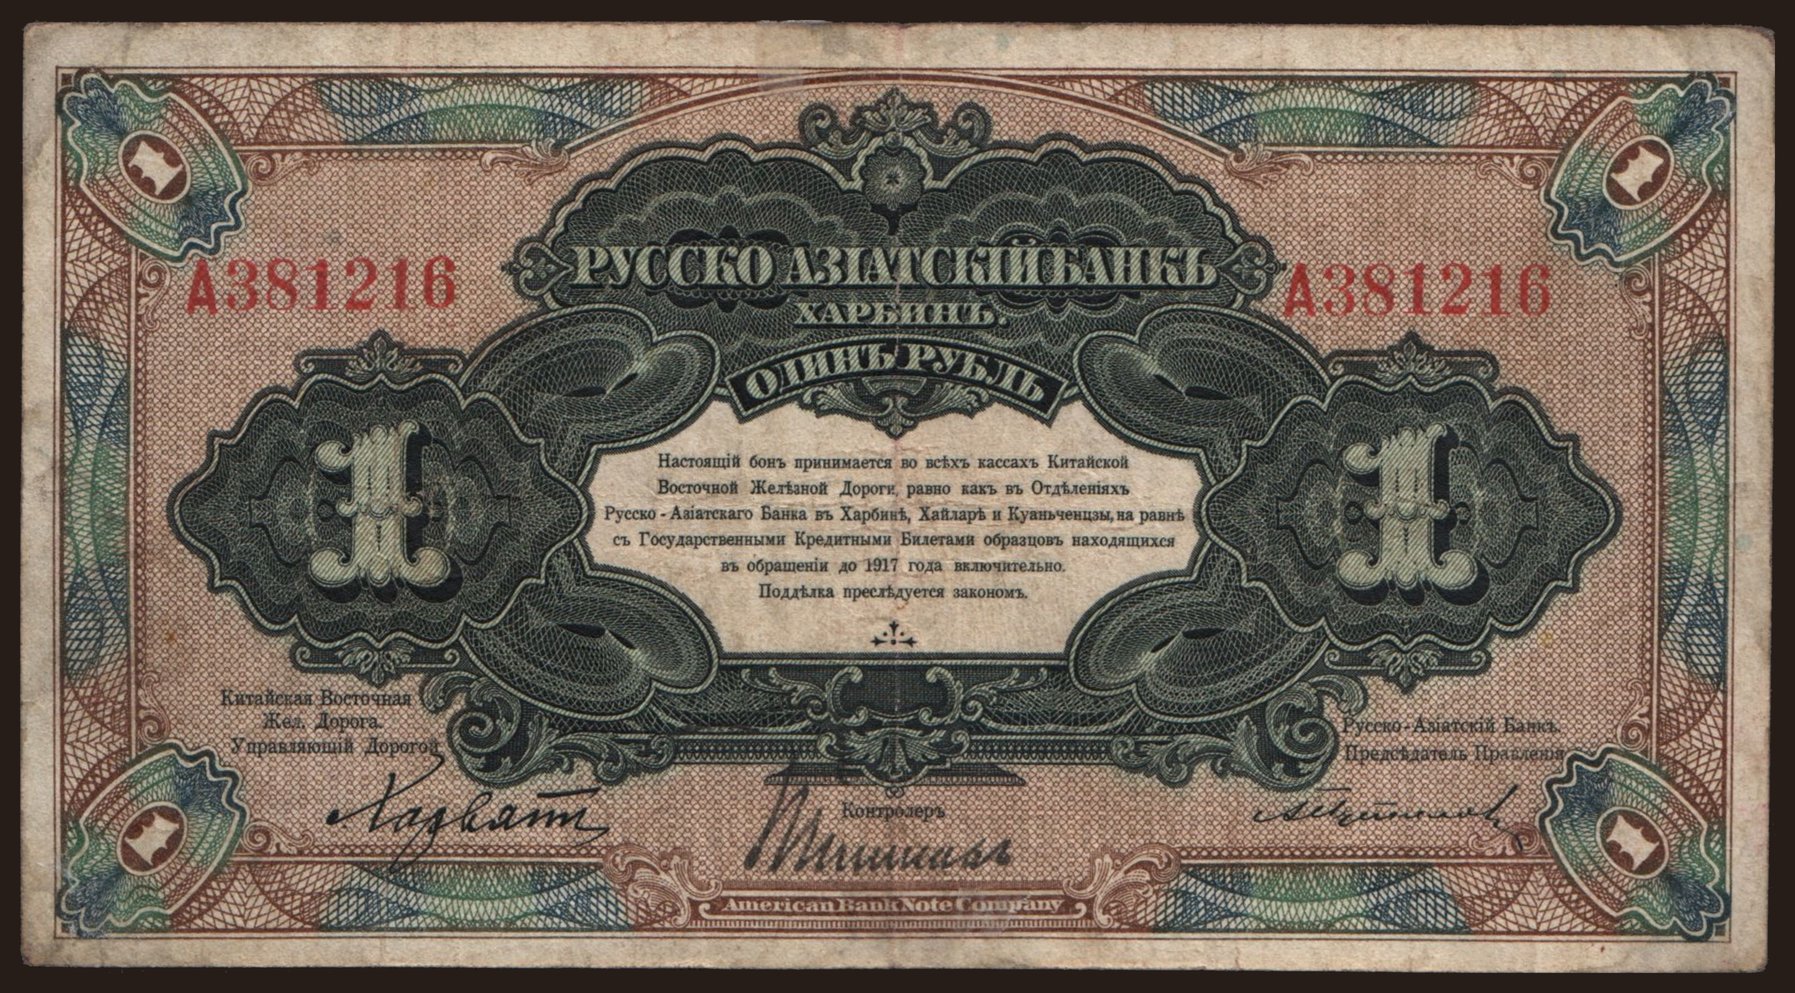 Russo-Asiatic Bank, 1 rubel, 1917